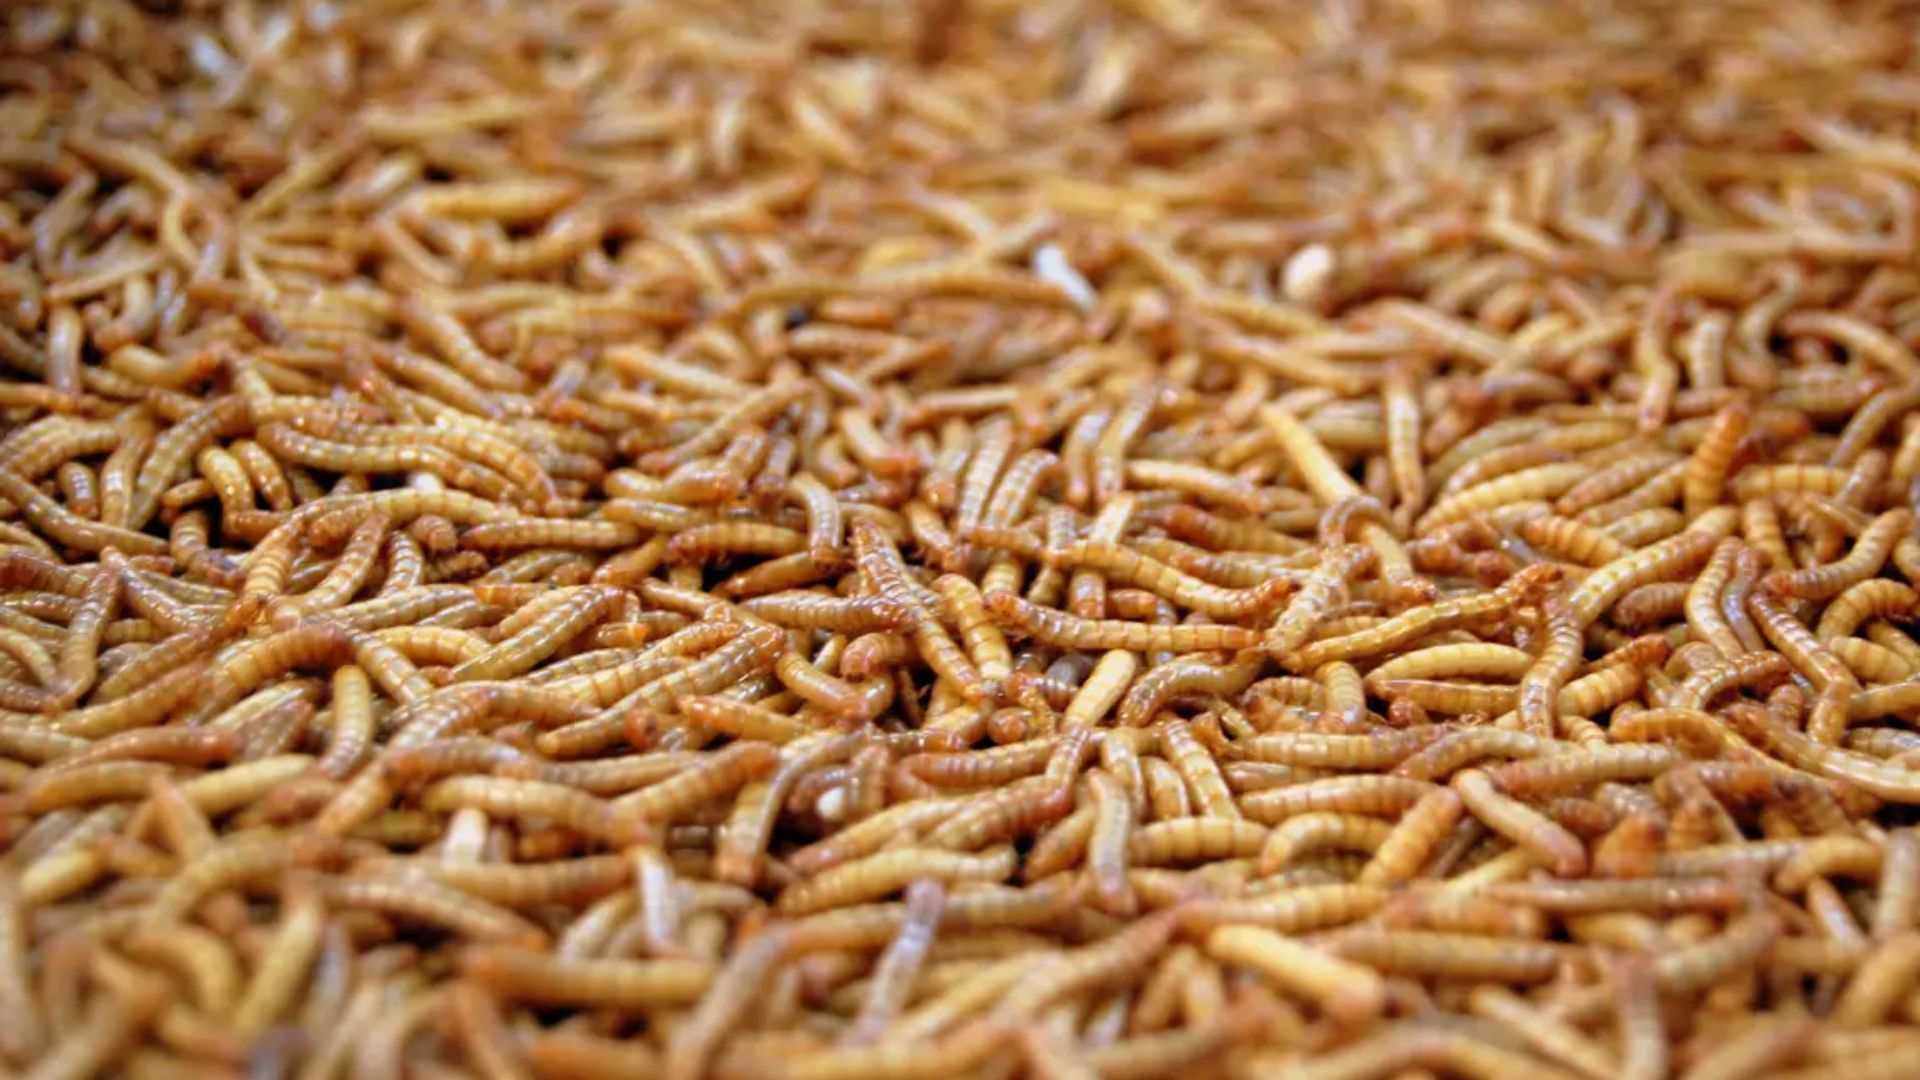 Red and Brown Maggots